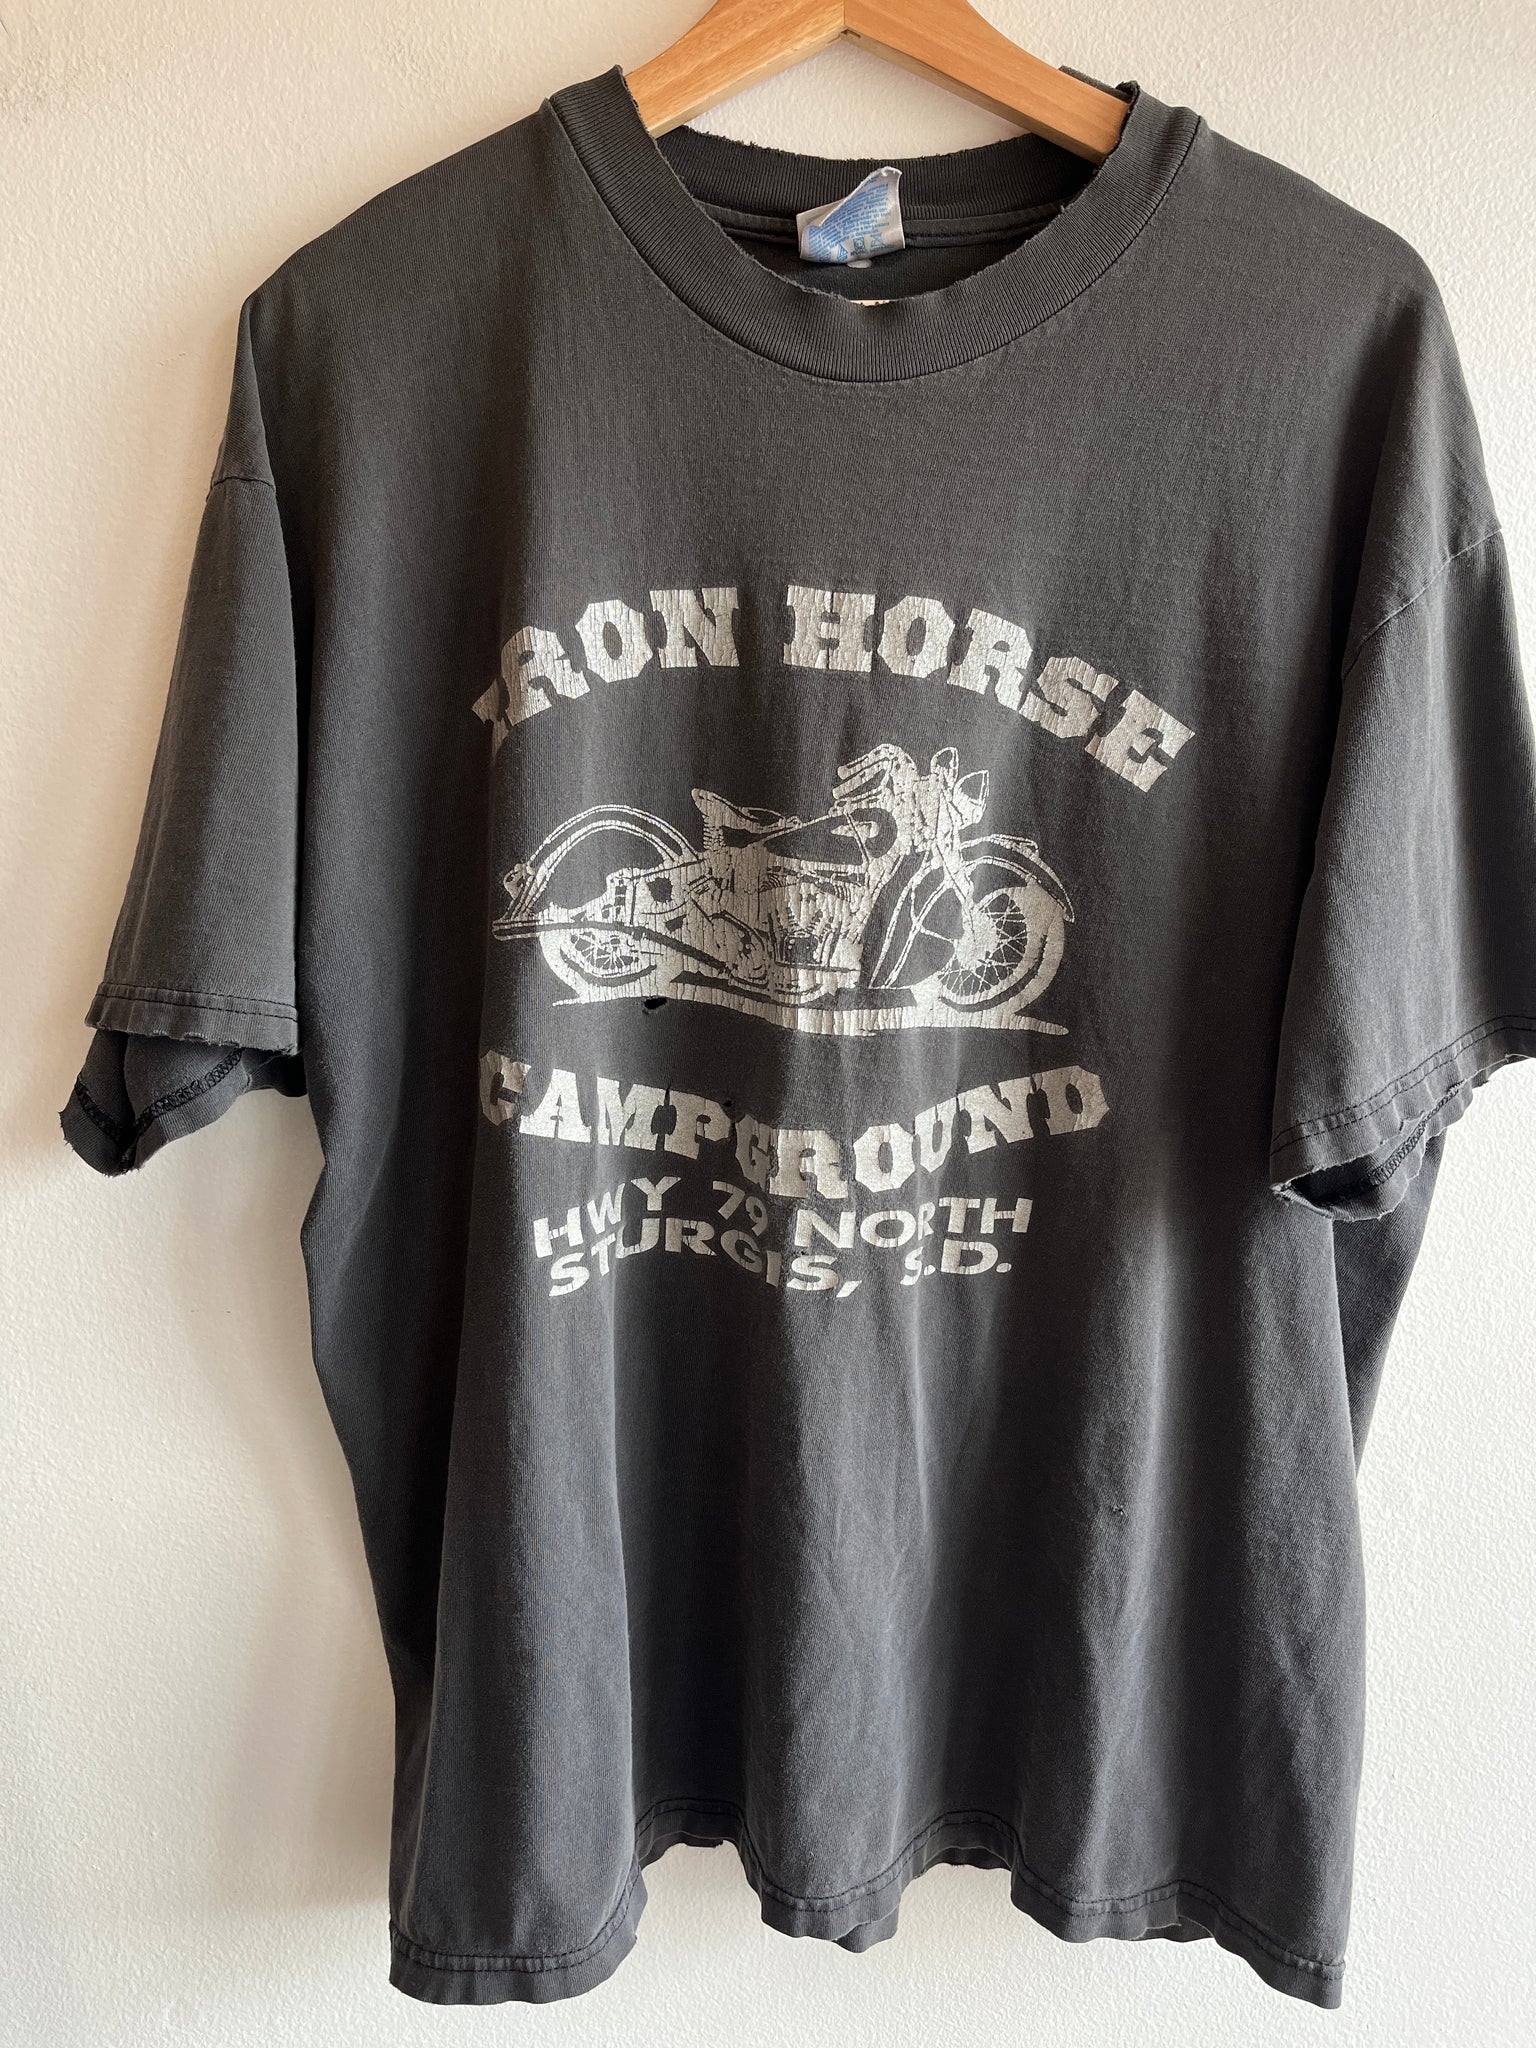 Vintage 1990’s Iron Horse Campground T-shirt